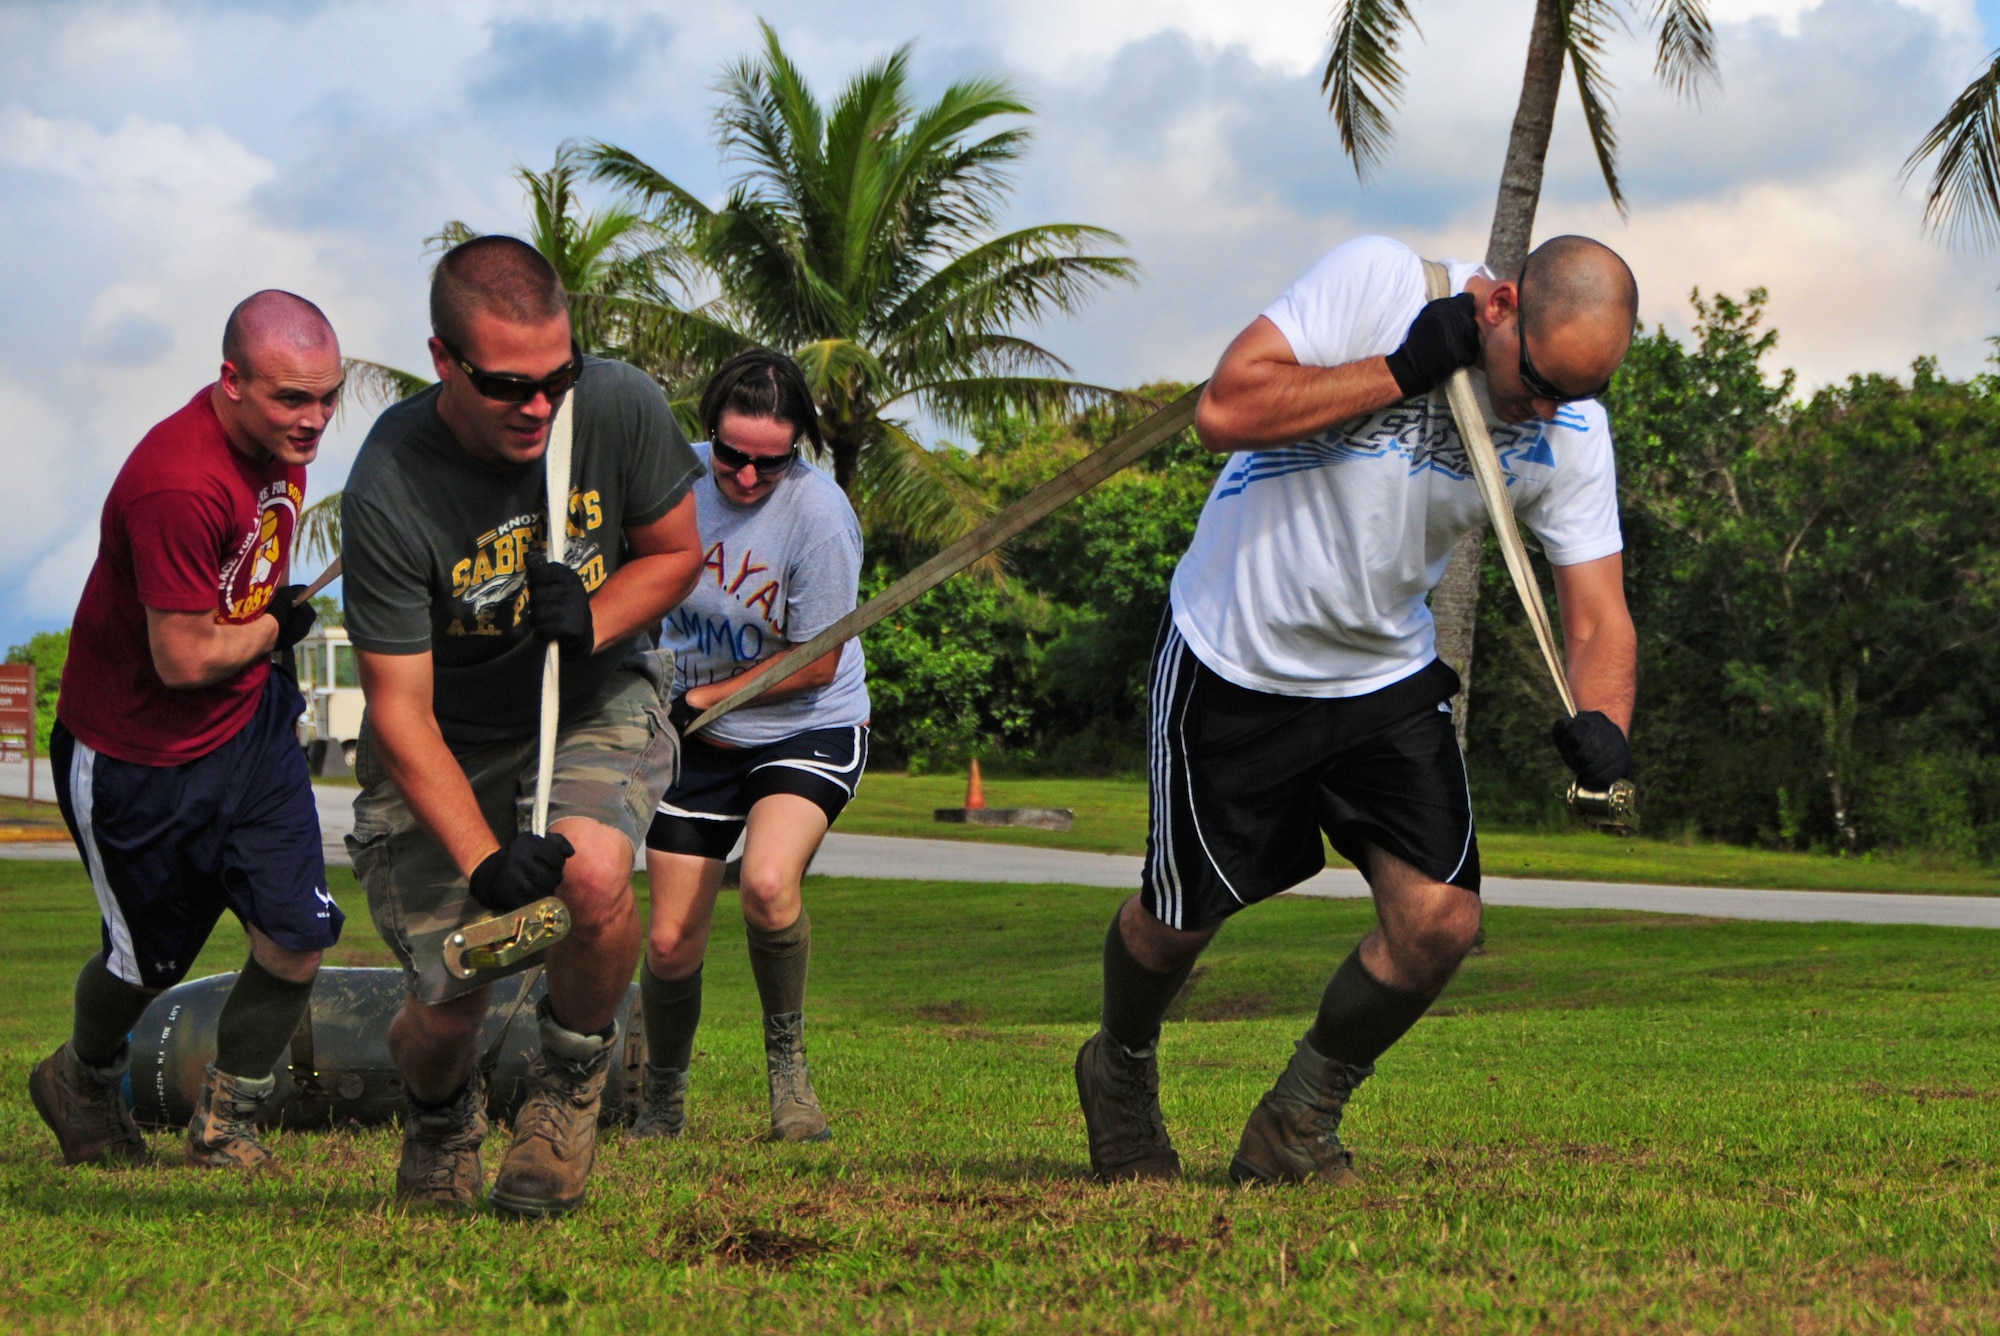 ANDERSEN AIR FORCE BASE, Guam – Airmen from the 36th Munitions Squadron work together to pull a 750 pound inert bomb during the Ammo Olympics here, Aug. 30. The Ammo Olympics is an annual event where the Airmen of 36th Munitions Squadron build teams and compete with each other in events that test the Airmen’s strength, teamwork and ingenuity. (U.S. Air Force photo by Airman 1st Class Marianique Santos/Released)